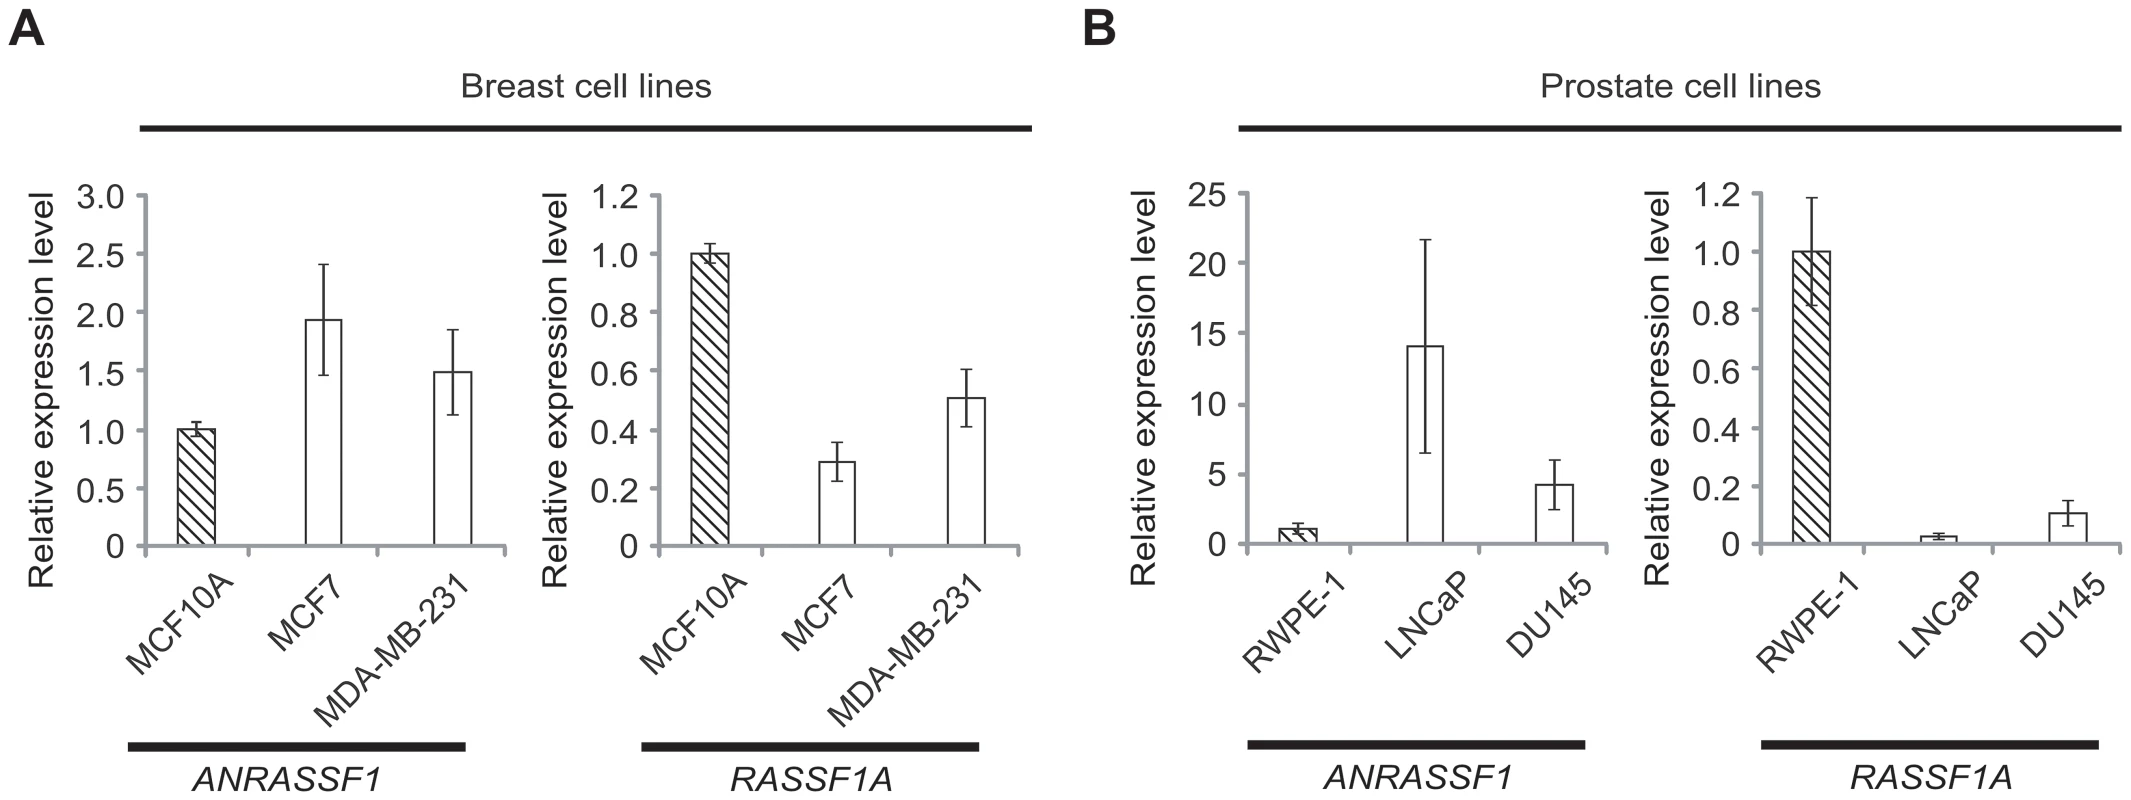 Inverse correlation between <i>ANRASSF1</i> and <i>RASSF1A</i> expression in non-tumor and tumor cell lines.